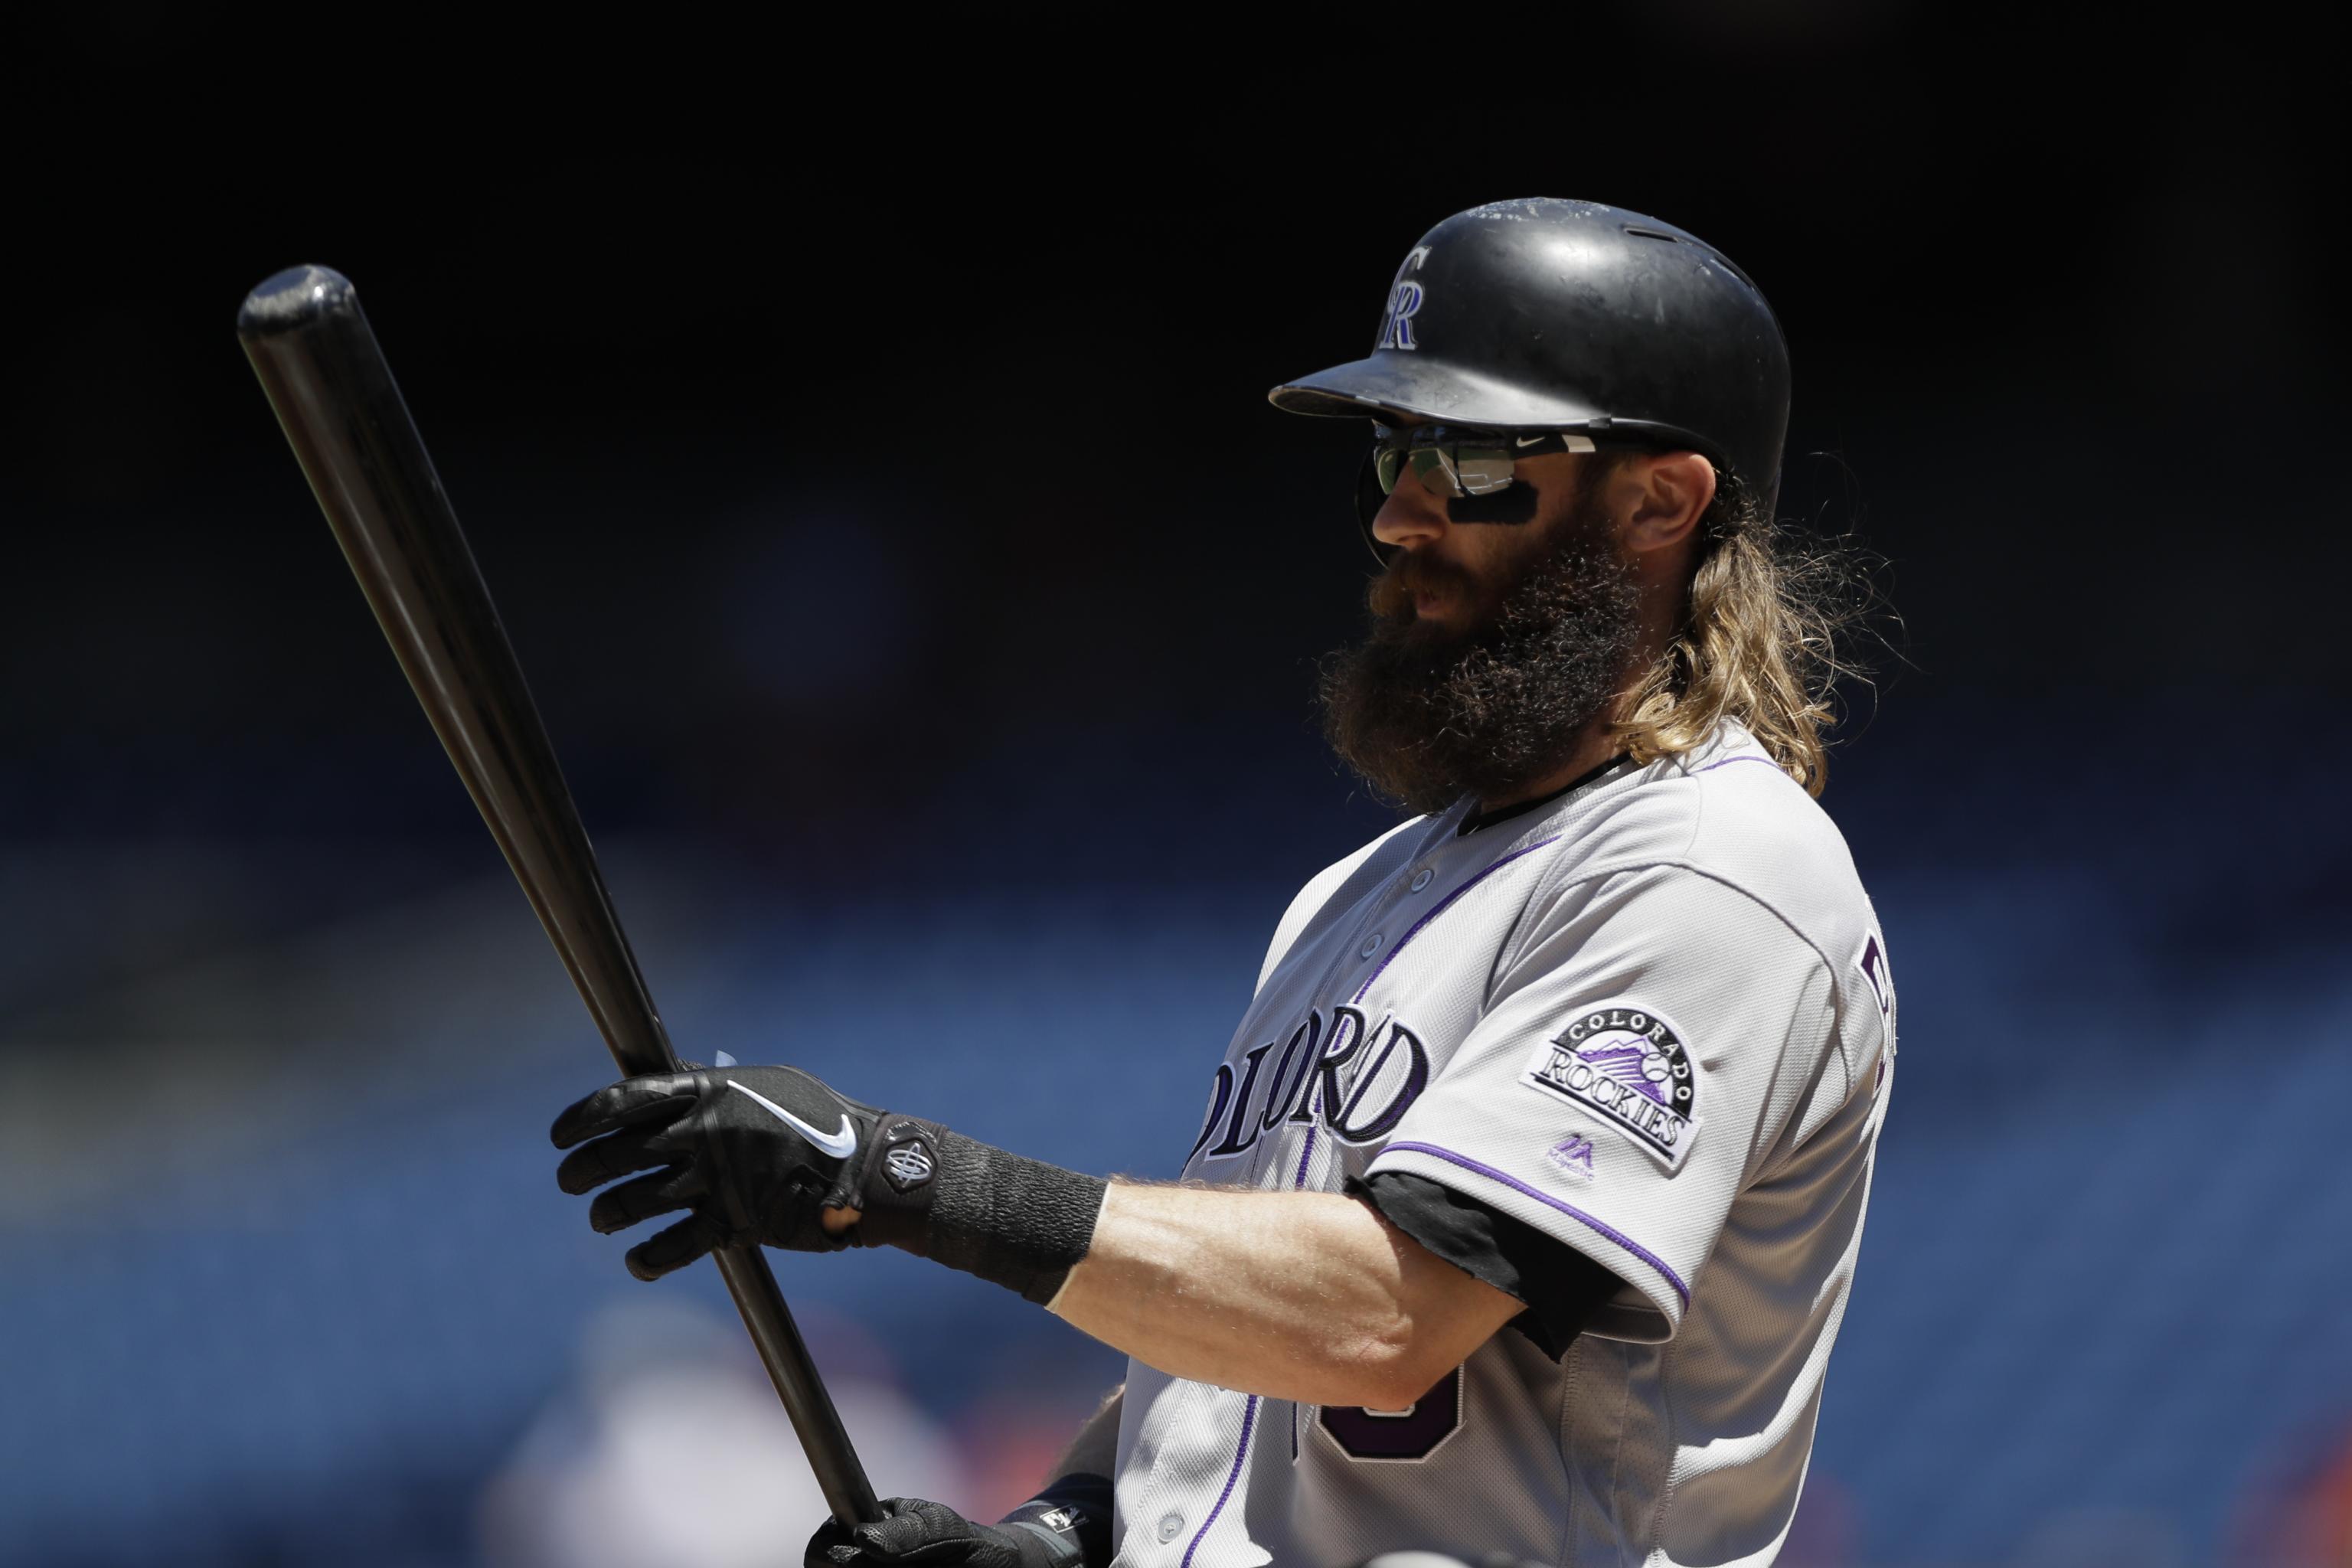 Charlie Blackmon is thriving, even as the Rockies continue to sink